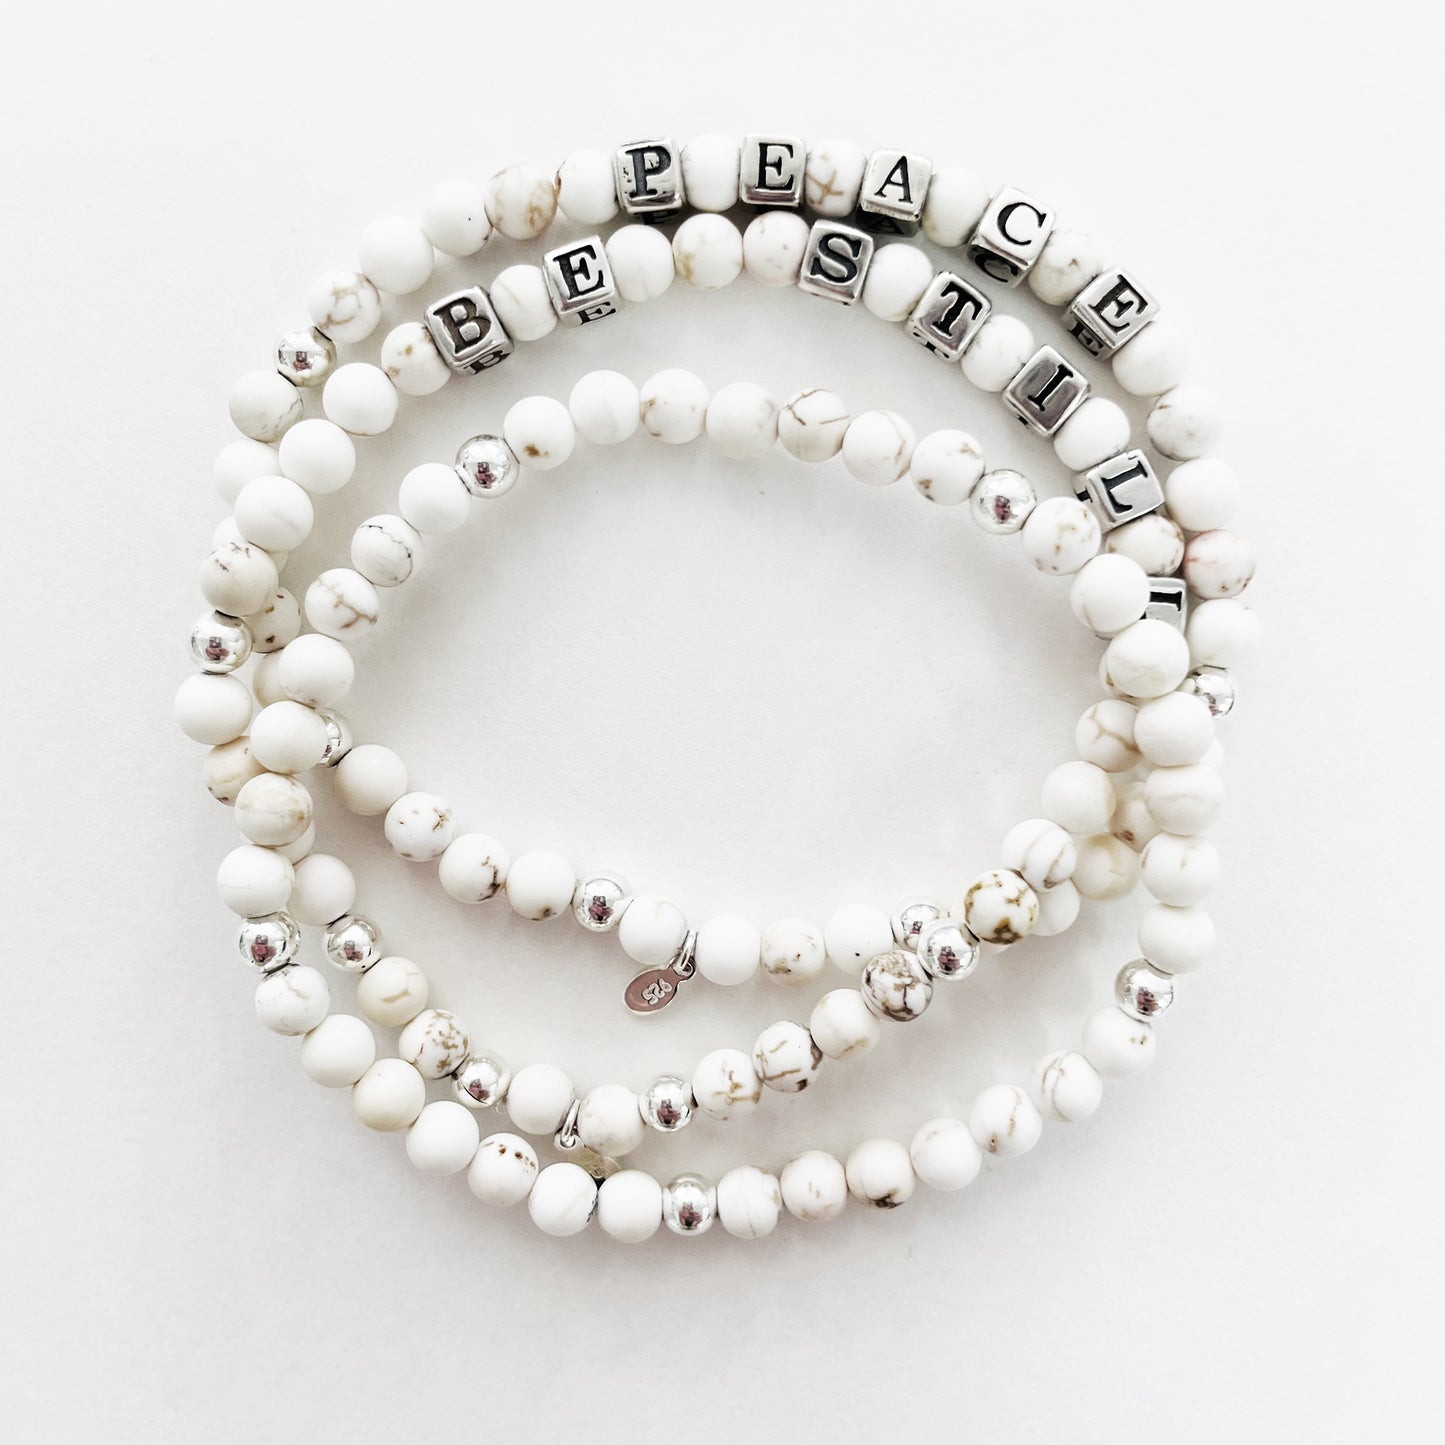 Be still sterling silver and white howlite beaded bracelet shown with Peace message bracelet in white howlite and sterling silver